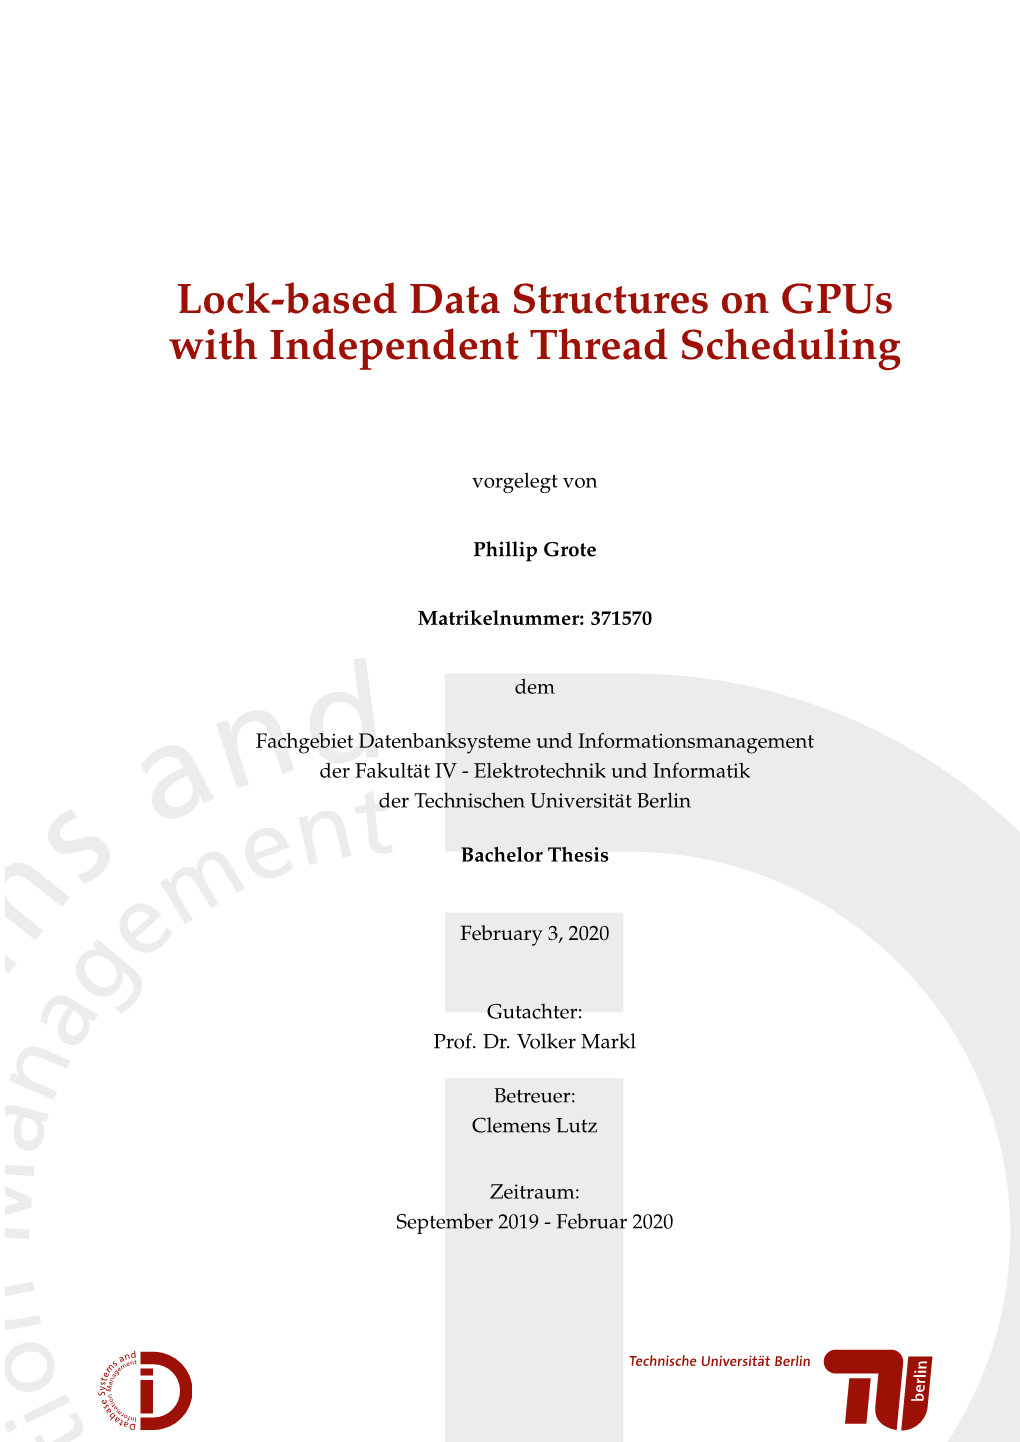 Lock-Based Data Structures on Gpus with Independent Thread Scheduling